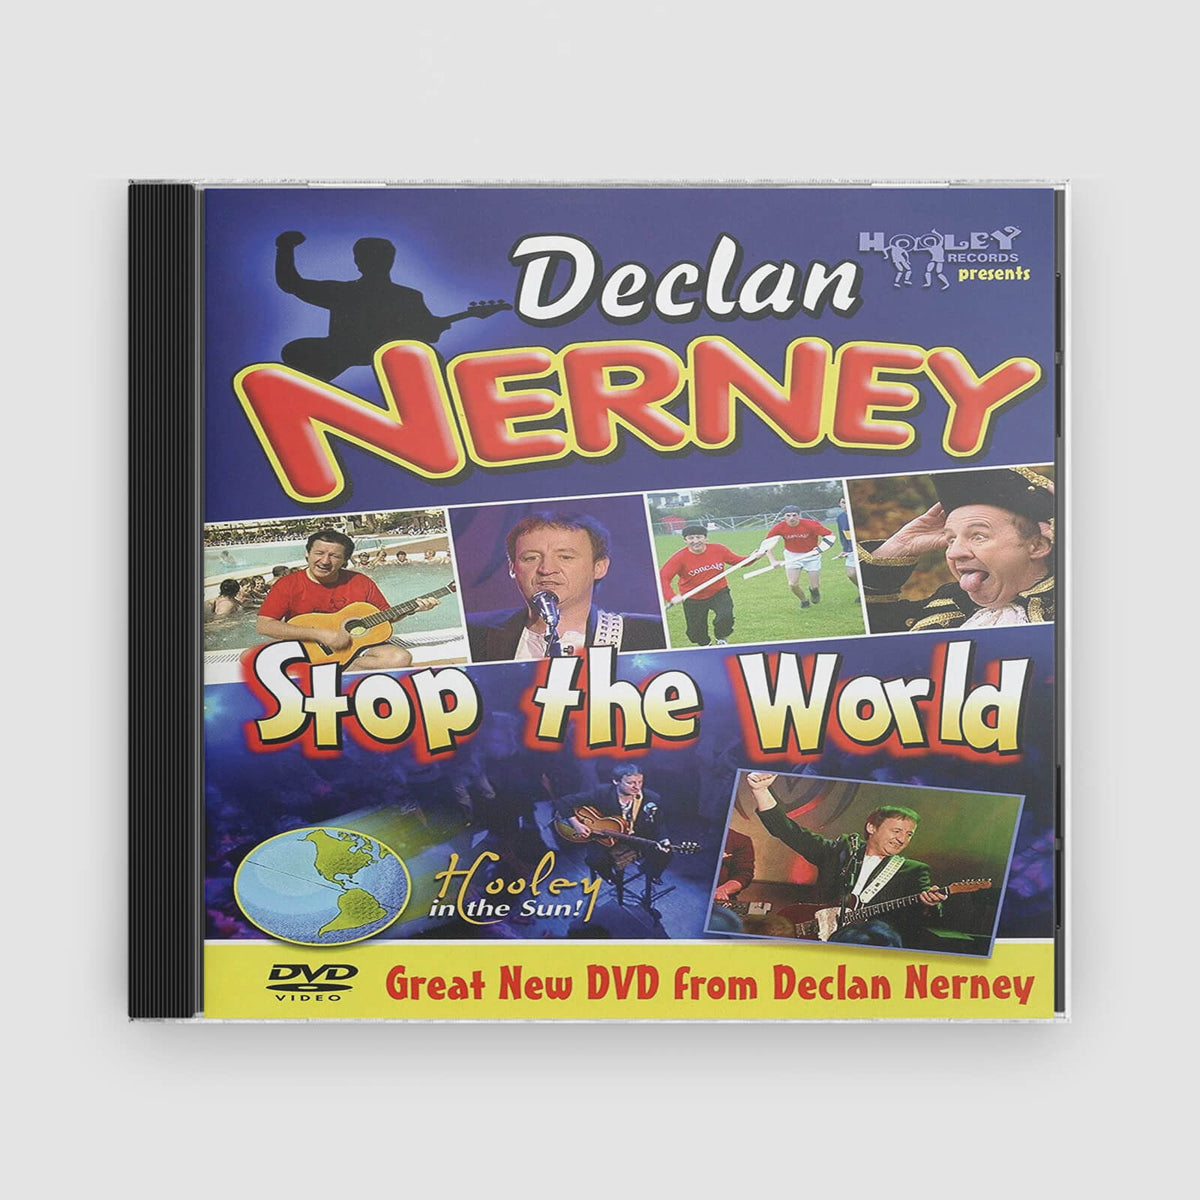 Declan Nerney : Stop the World (Hooley in the Sun)